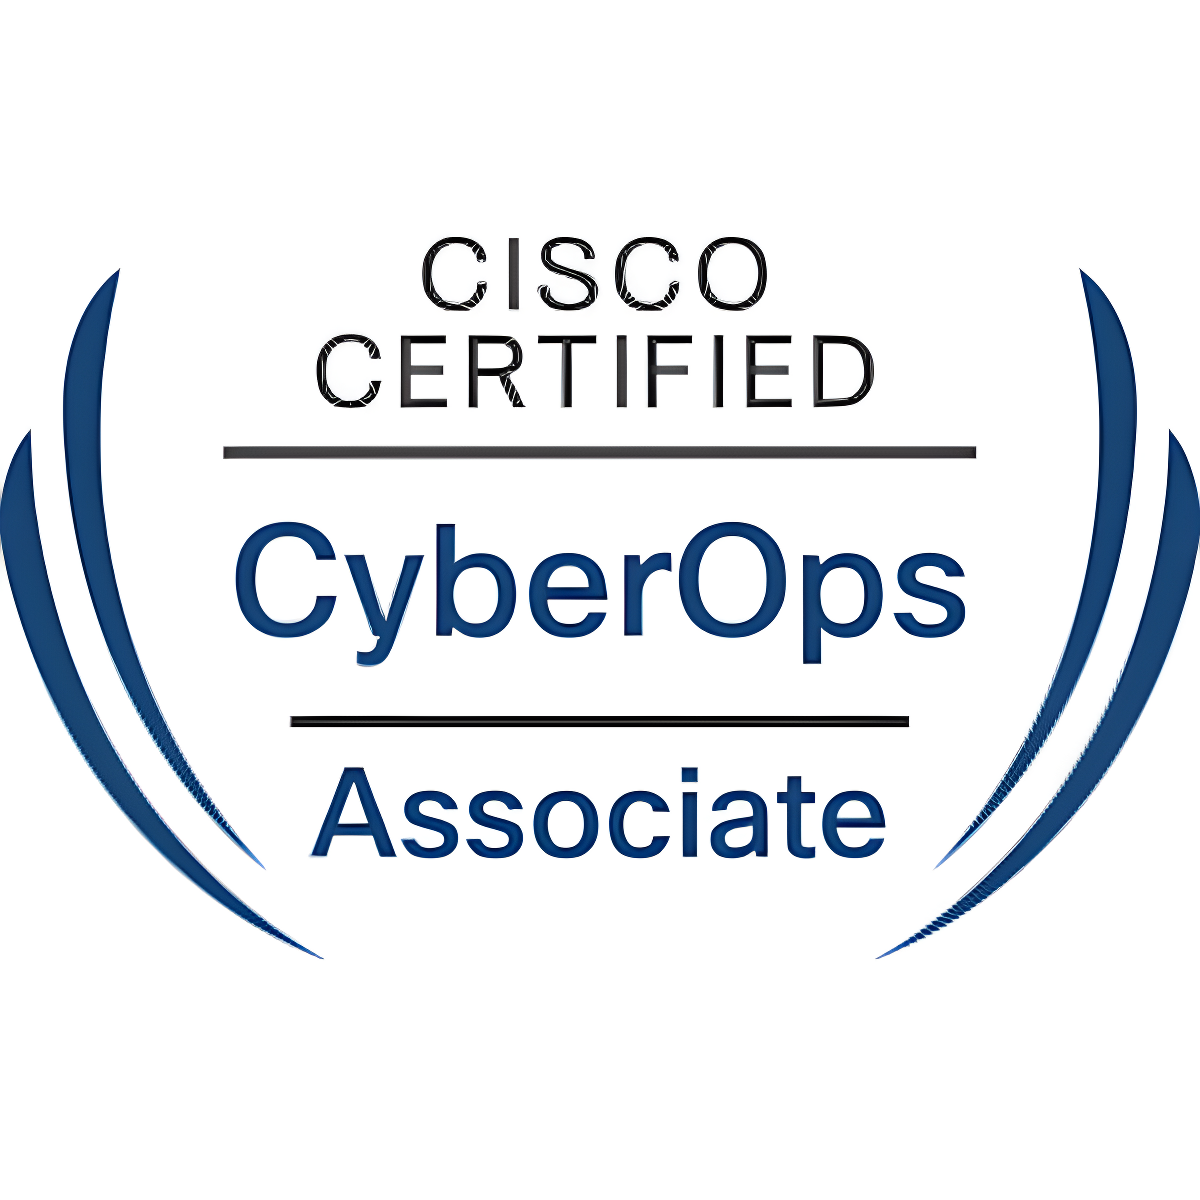 Cybersecurity, Hadar Training, Cisco Certification, CyberOps Expertise, Network Defense Training, Professional Growth, Cyber Threat Management, Skill Enhancement, IT Security Trends, Career Advancement.